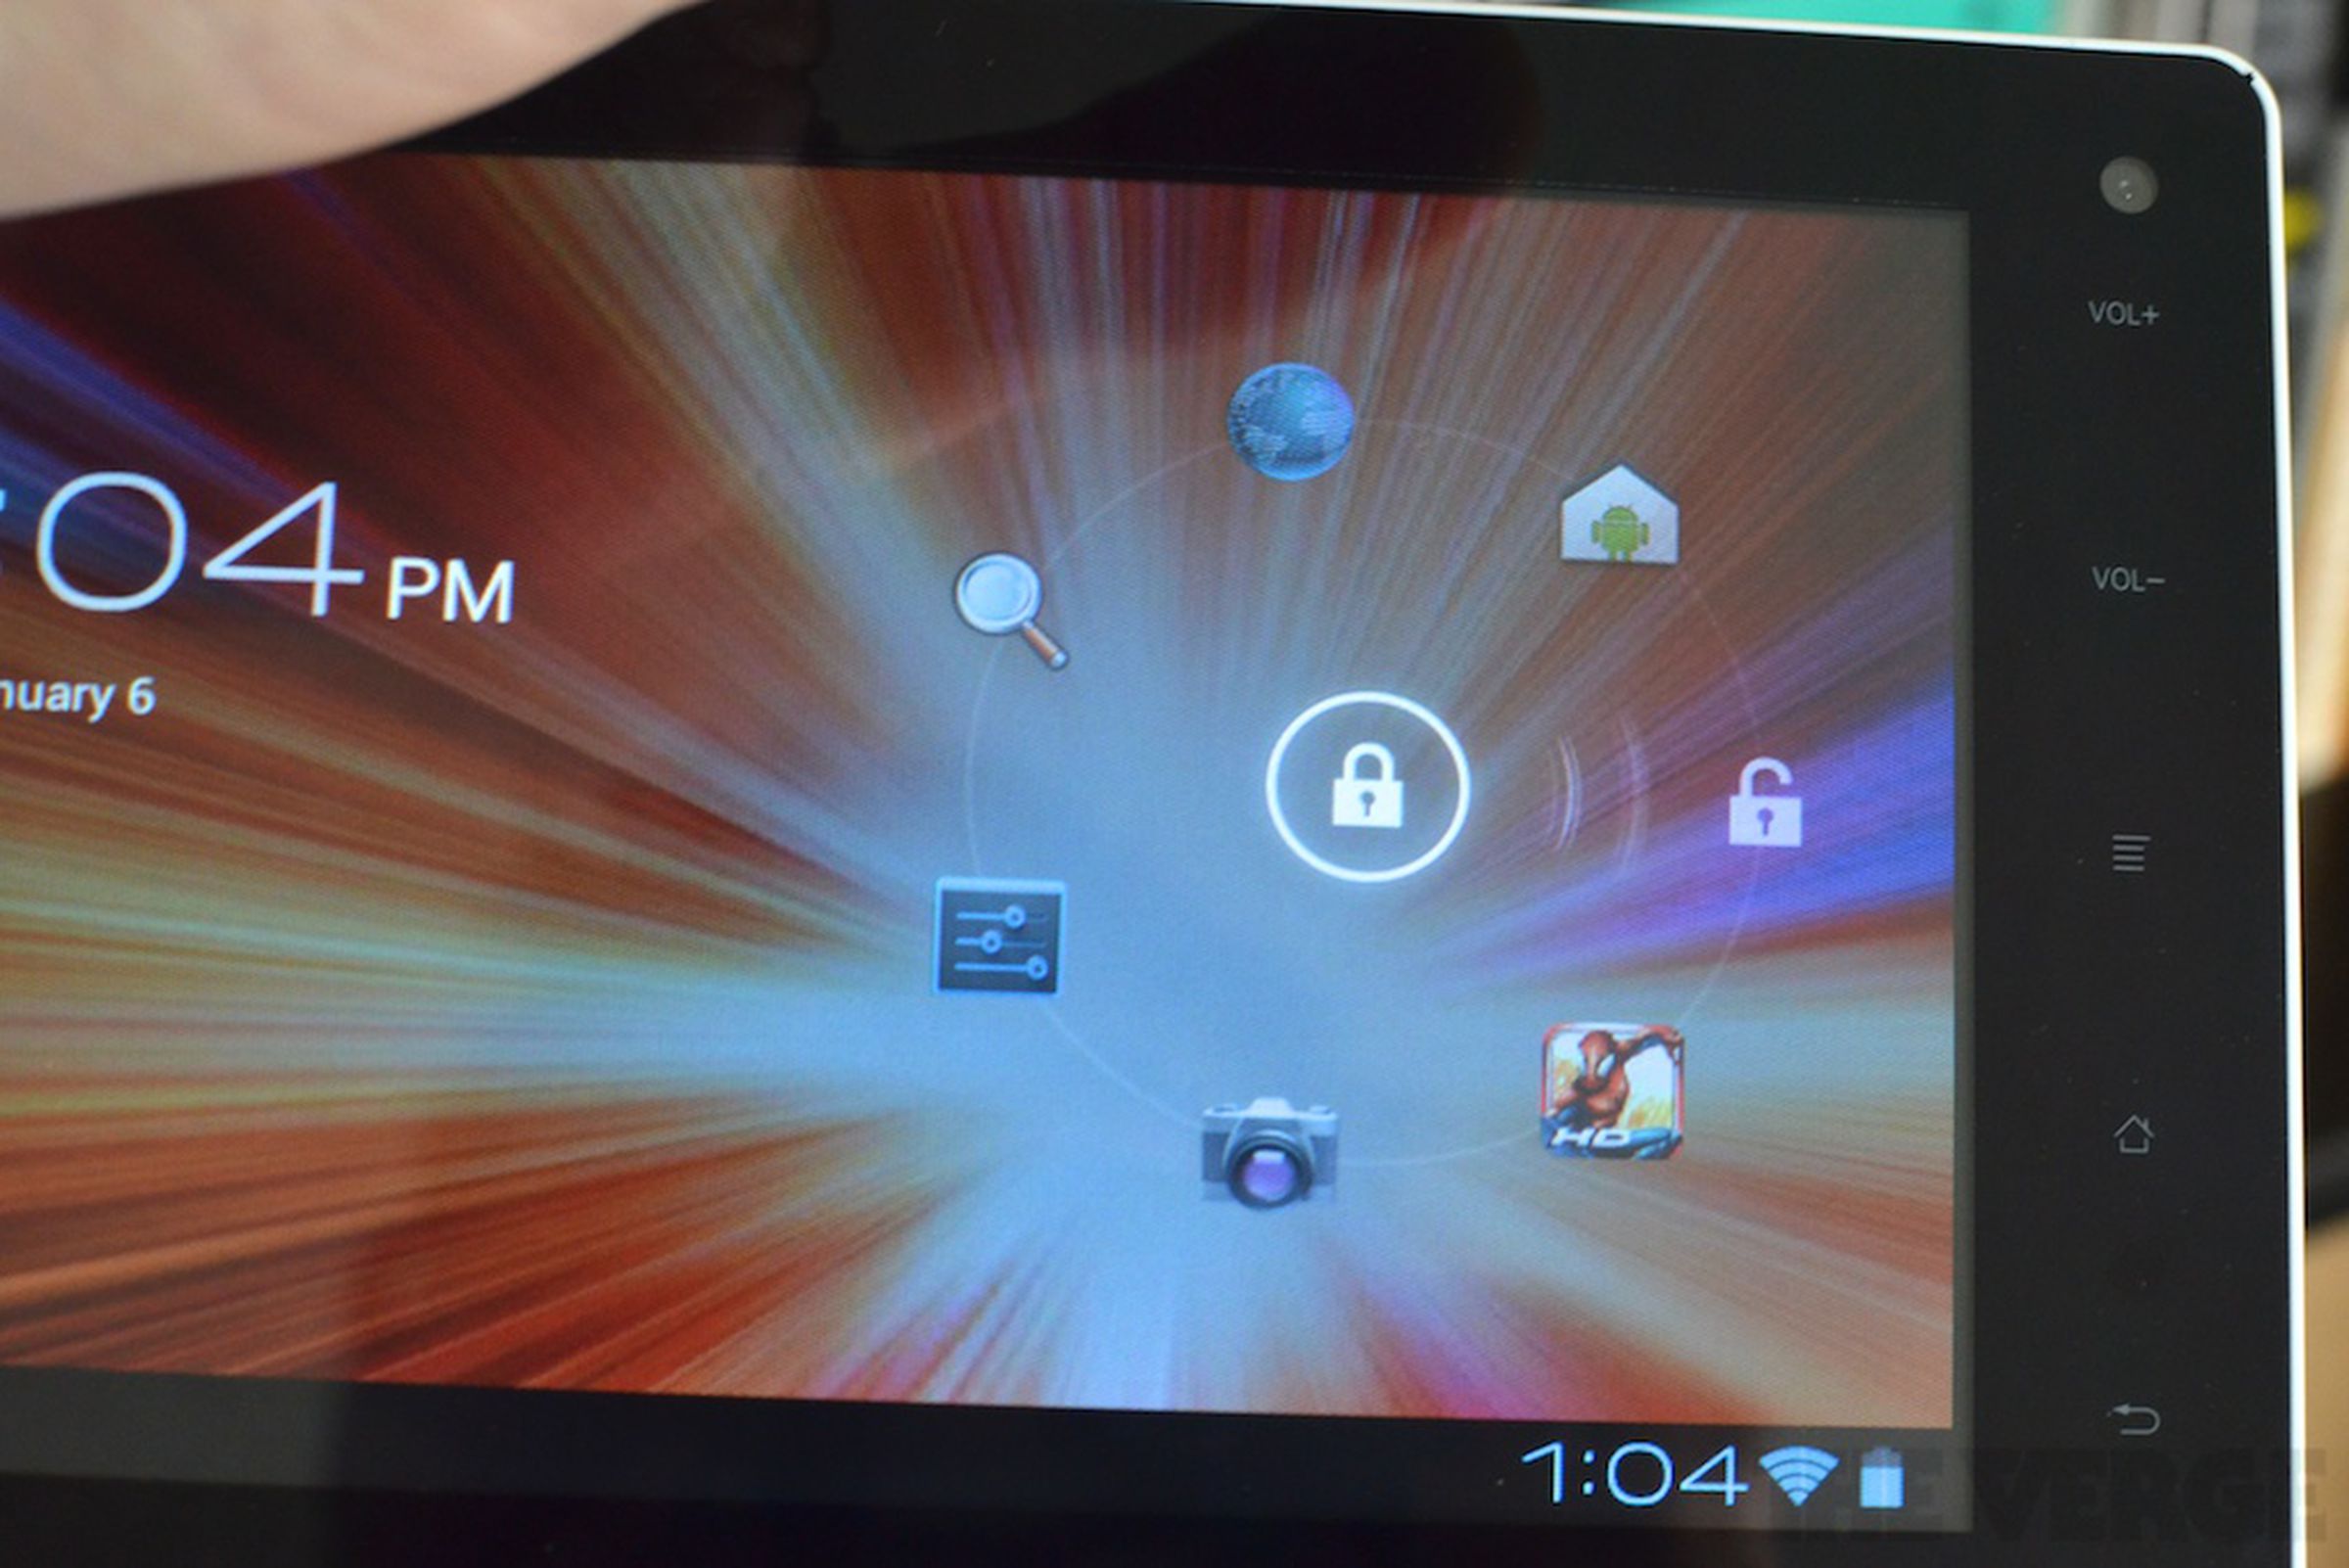 Novo7 Basic Android 4.0 tablet pictures